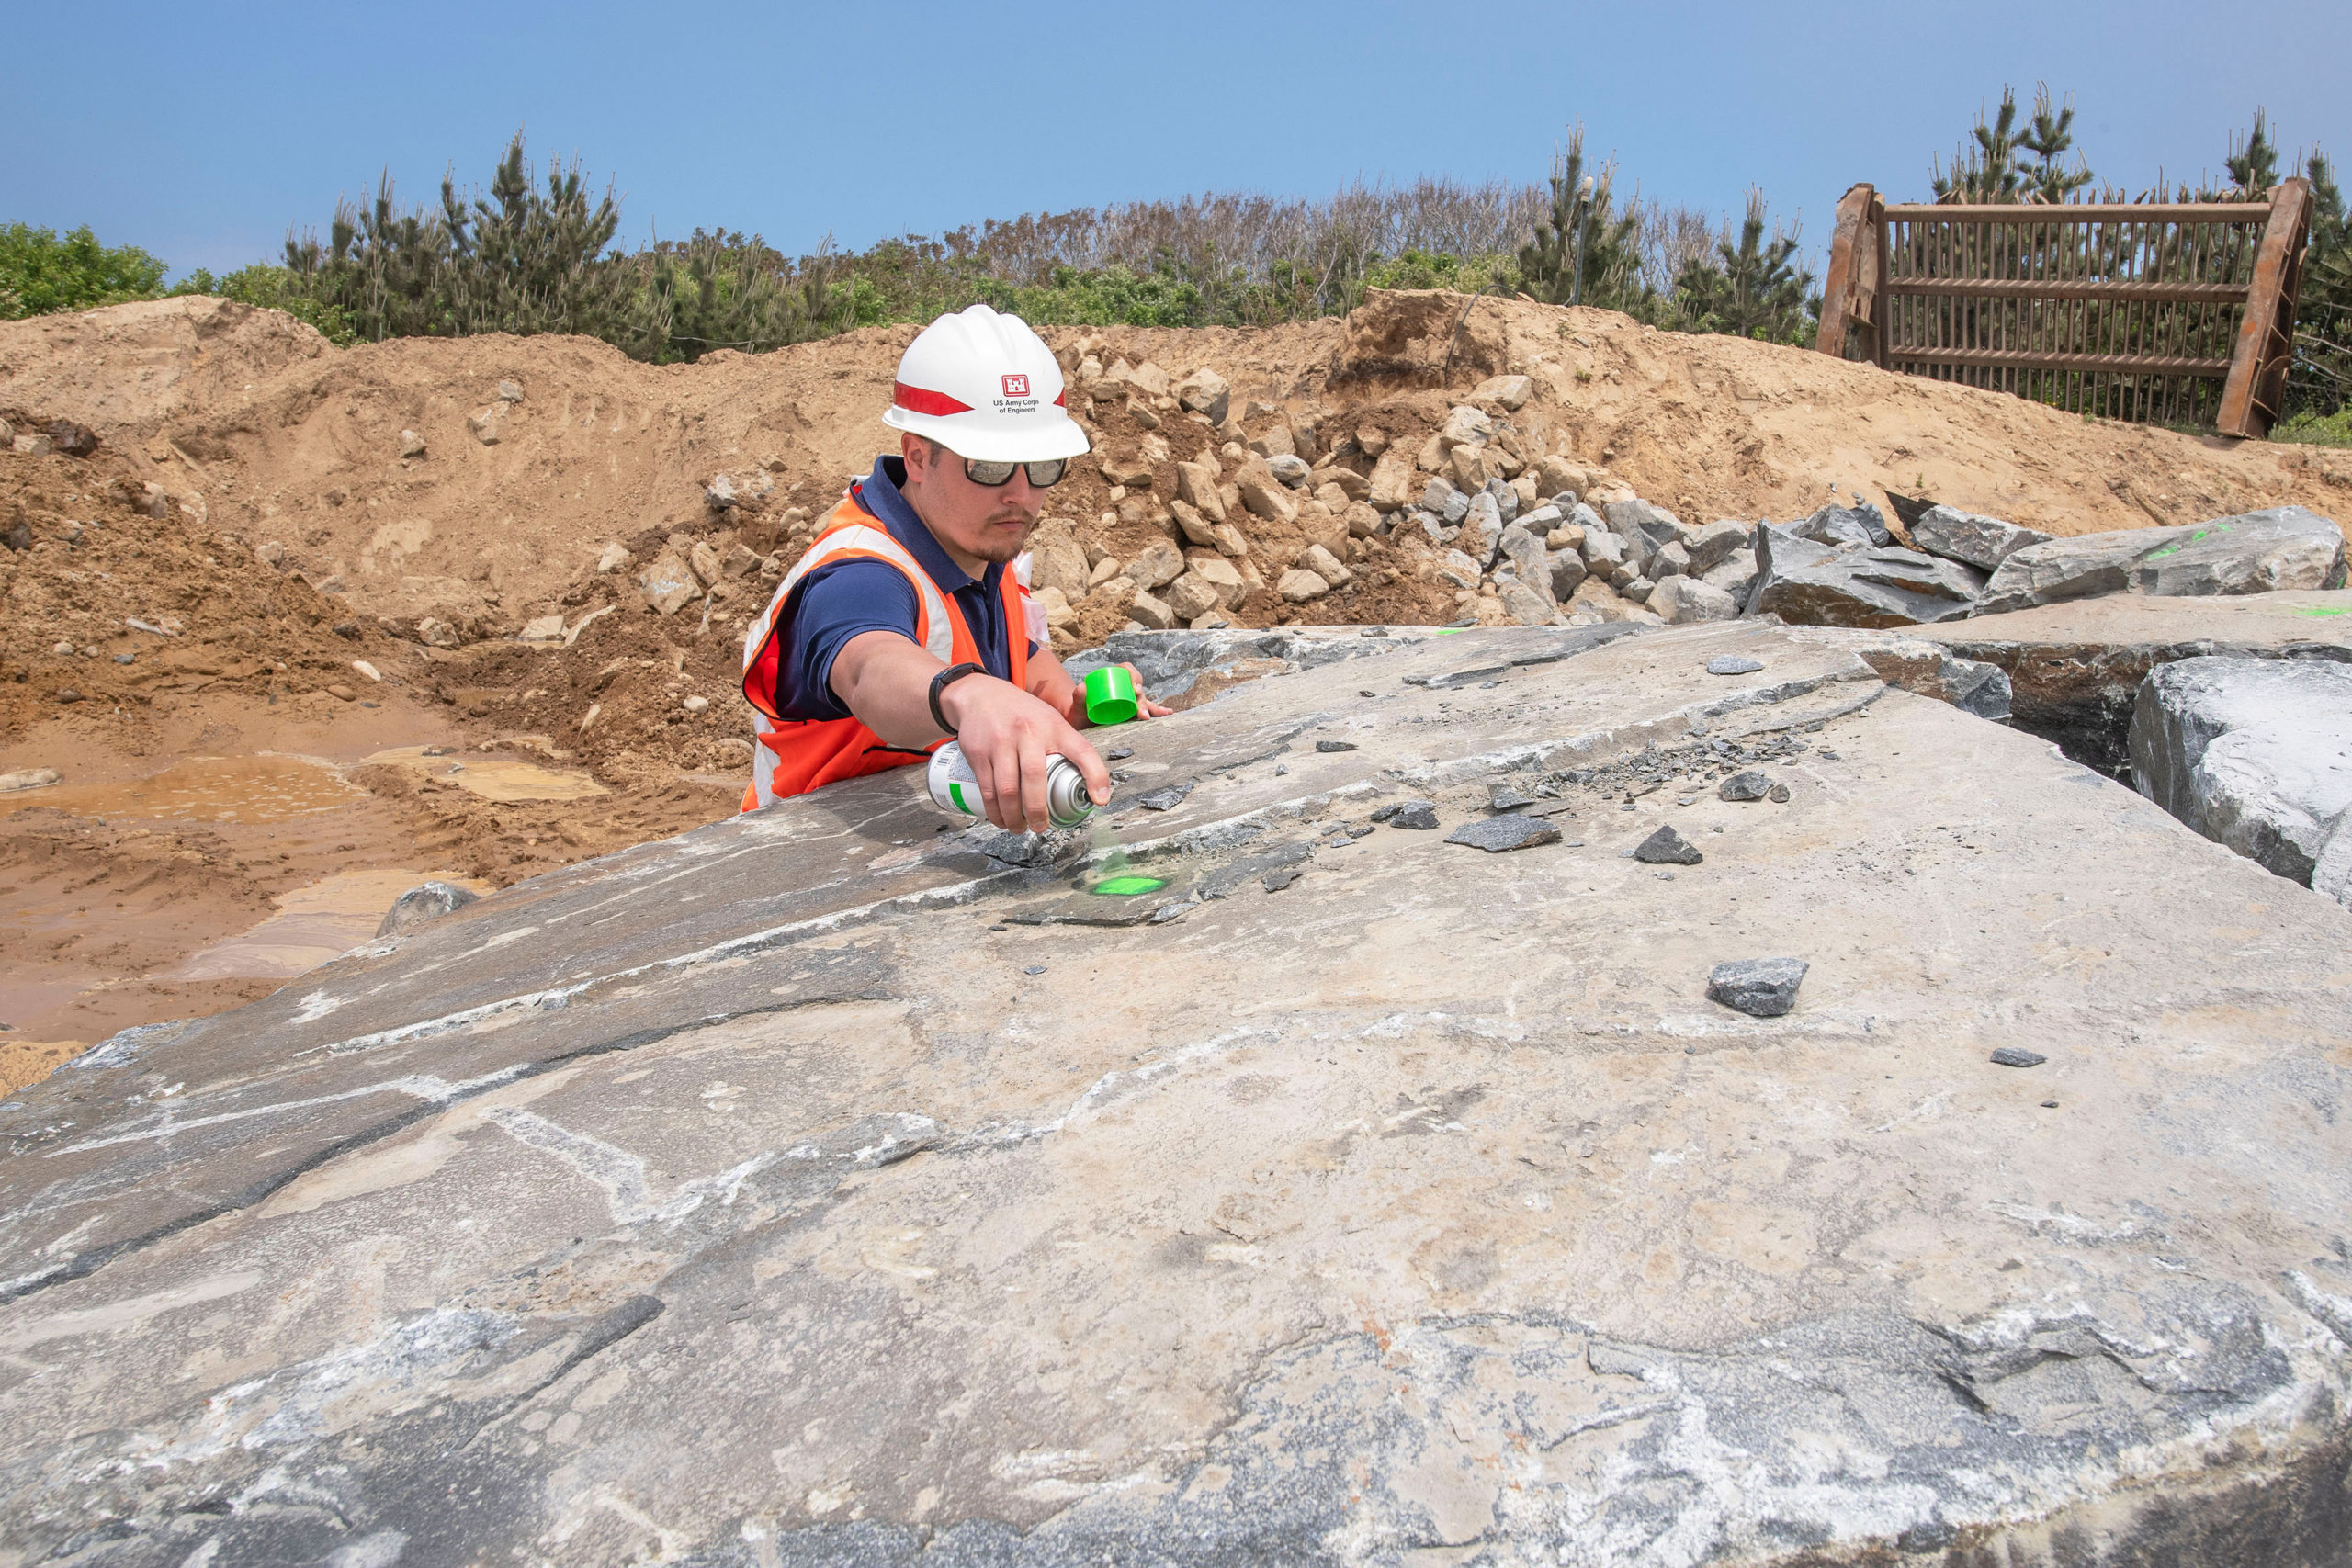 U.S. Army Corps of Engineers Quality Assurance Officer Mike Folcik spray paints a mark on a large boulder to signify that it has passed his inspection (no cracks, etc.) as part of the Army Corps of Engineers' Montauk Point Revetment Project on Monday.  MICHAEL HELLER